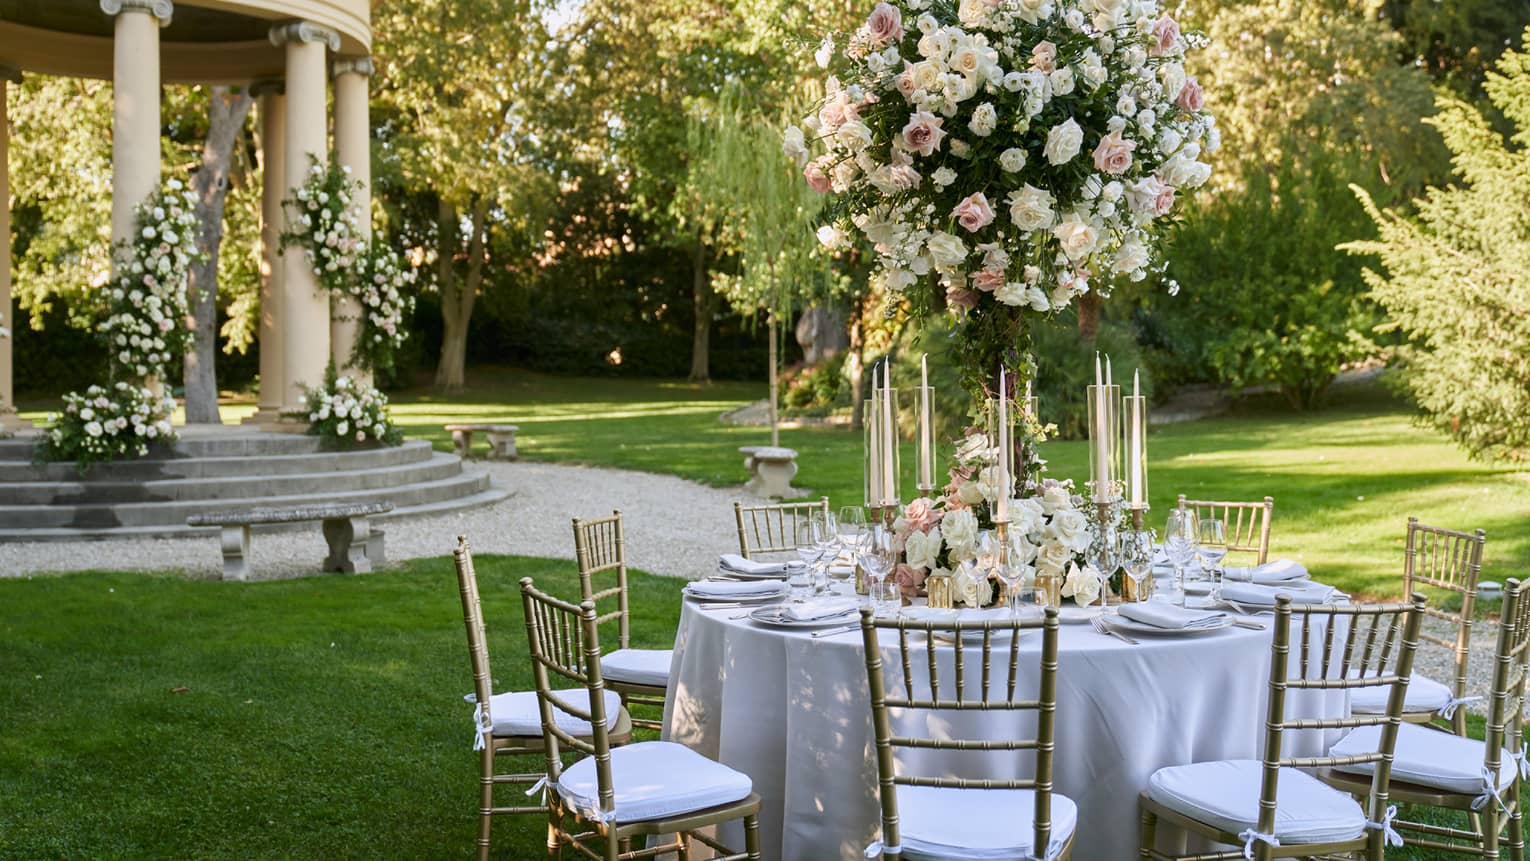 White formally set wedding reception table in garden with large white topiary and gazebo in backdrop